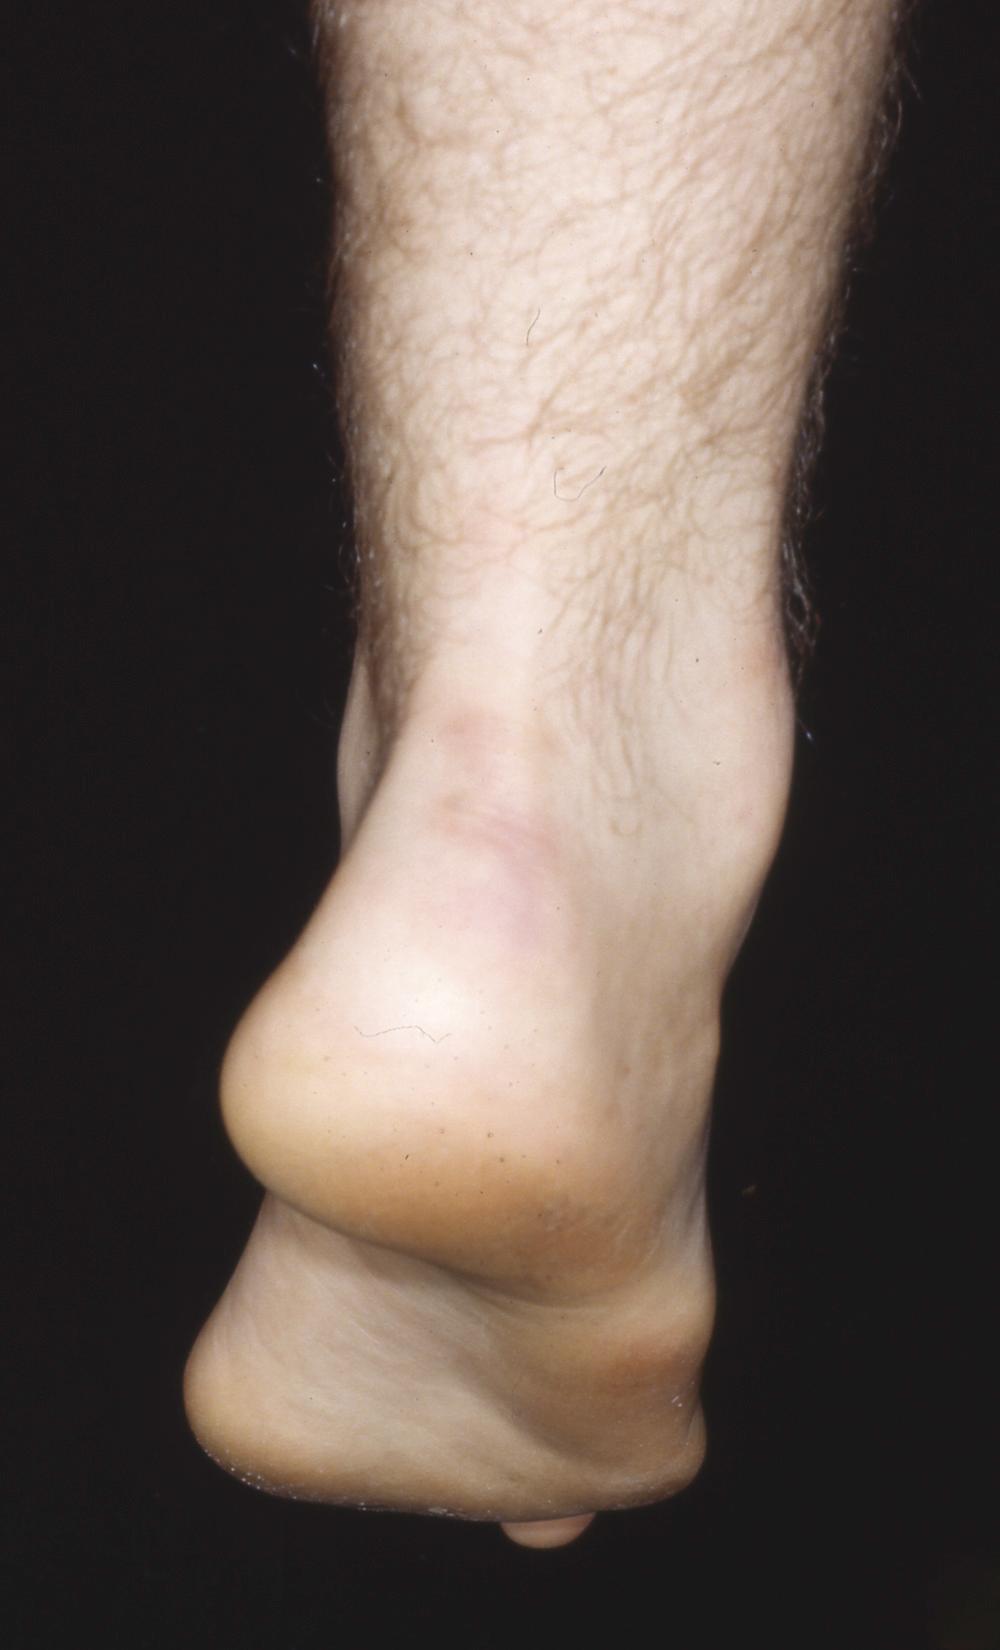 FIGURE 87.18, Eighteen-year-old man with Charcot-Marie-Tooth disease with fixed hindfoot varus, marked forefoot equinus, plantarflexed first ray, forefoot pronation during weight bearing, tight plantar fascia, and contracted Achilles tendon but no palpable contraction of peroneus longus.